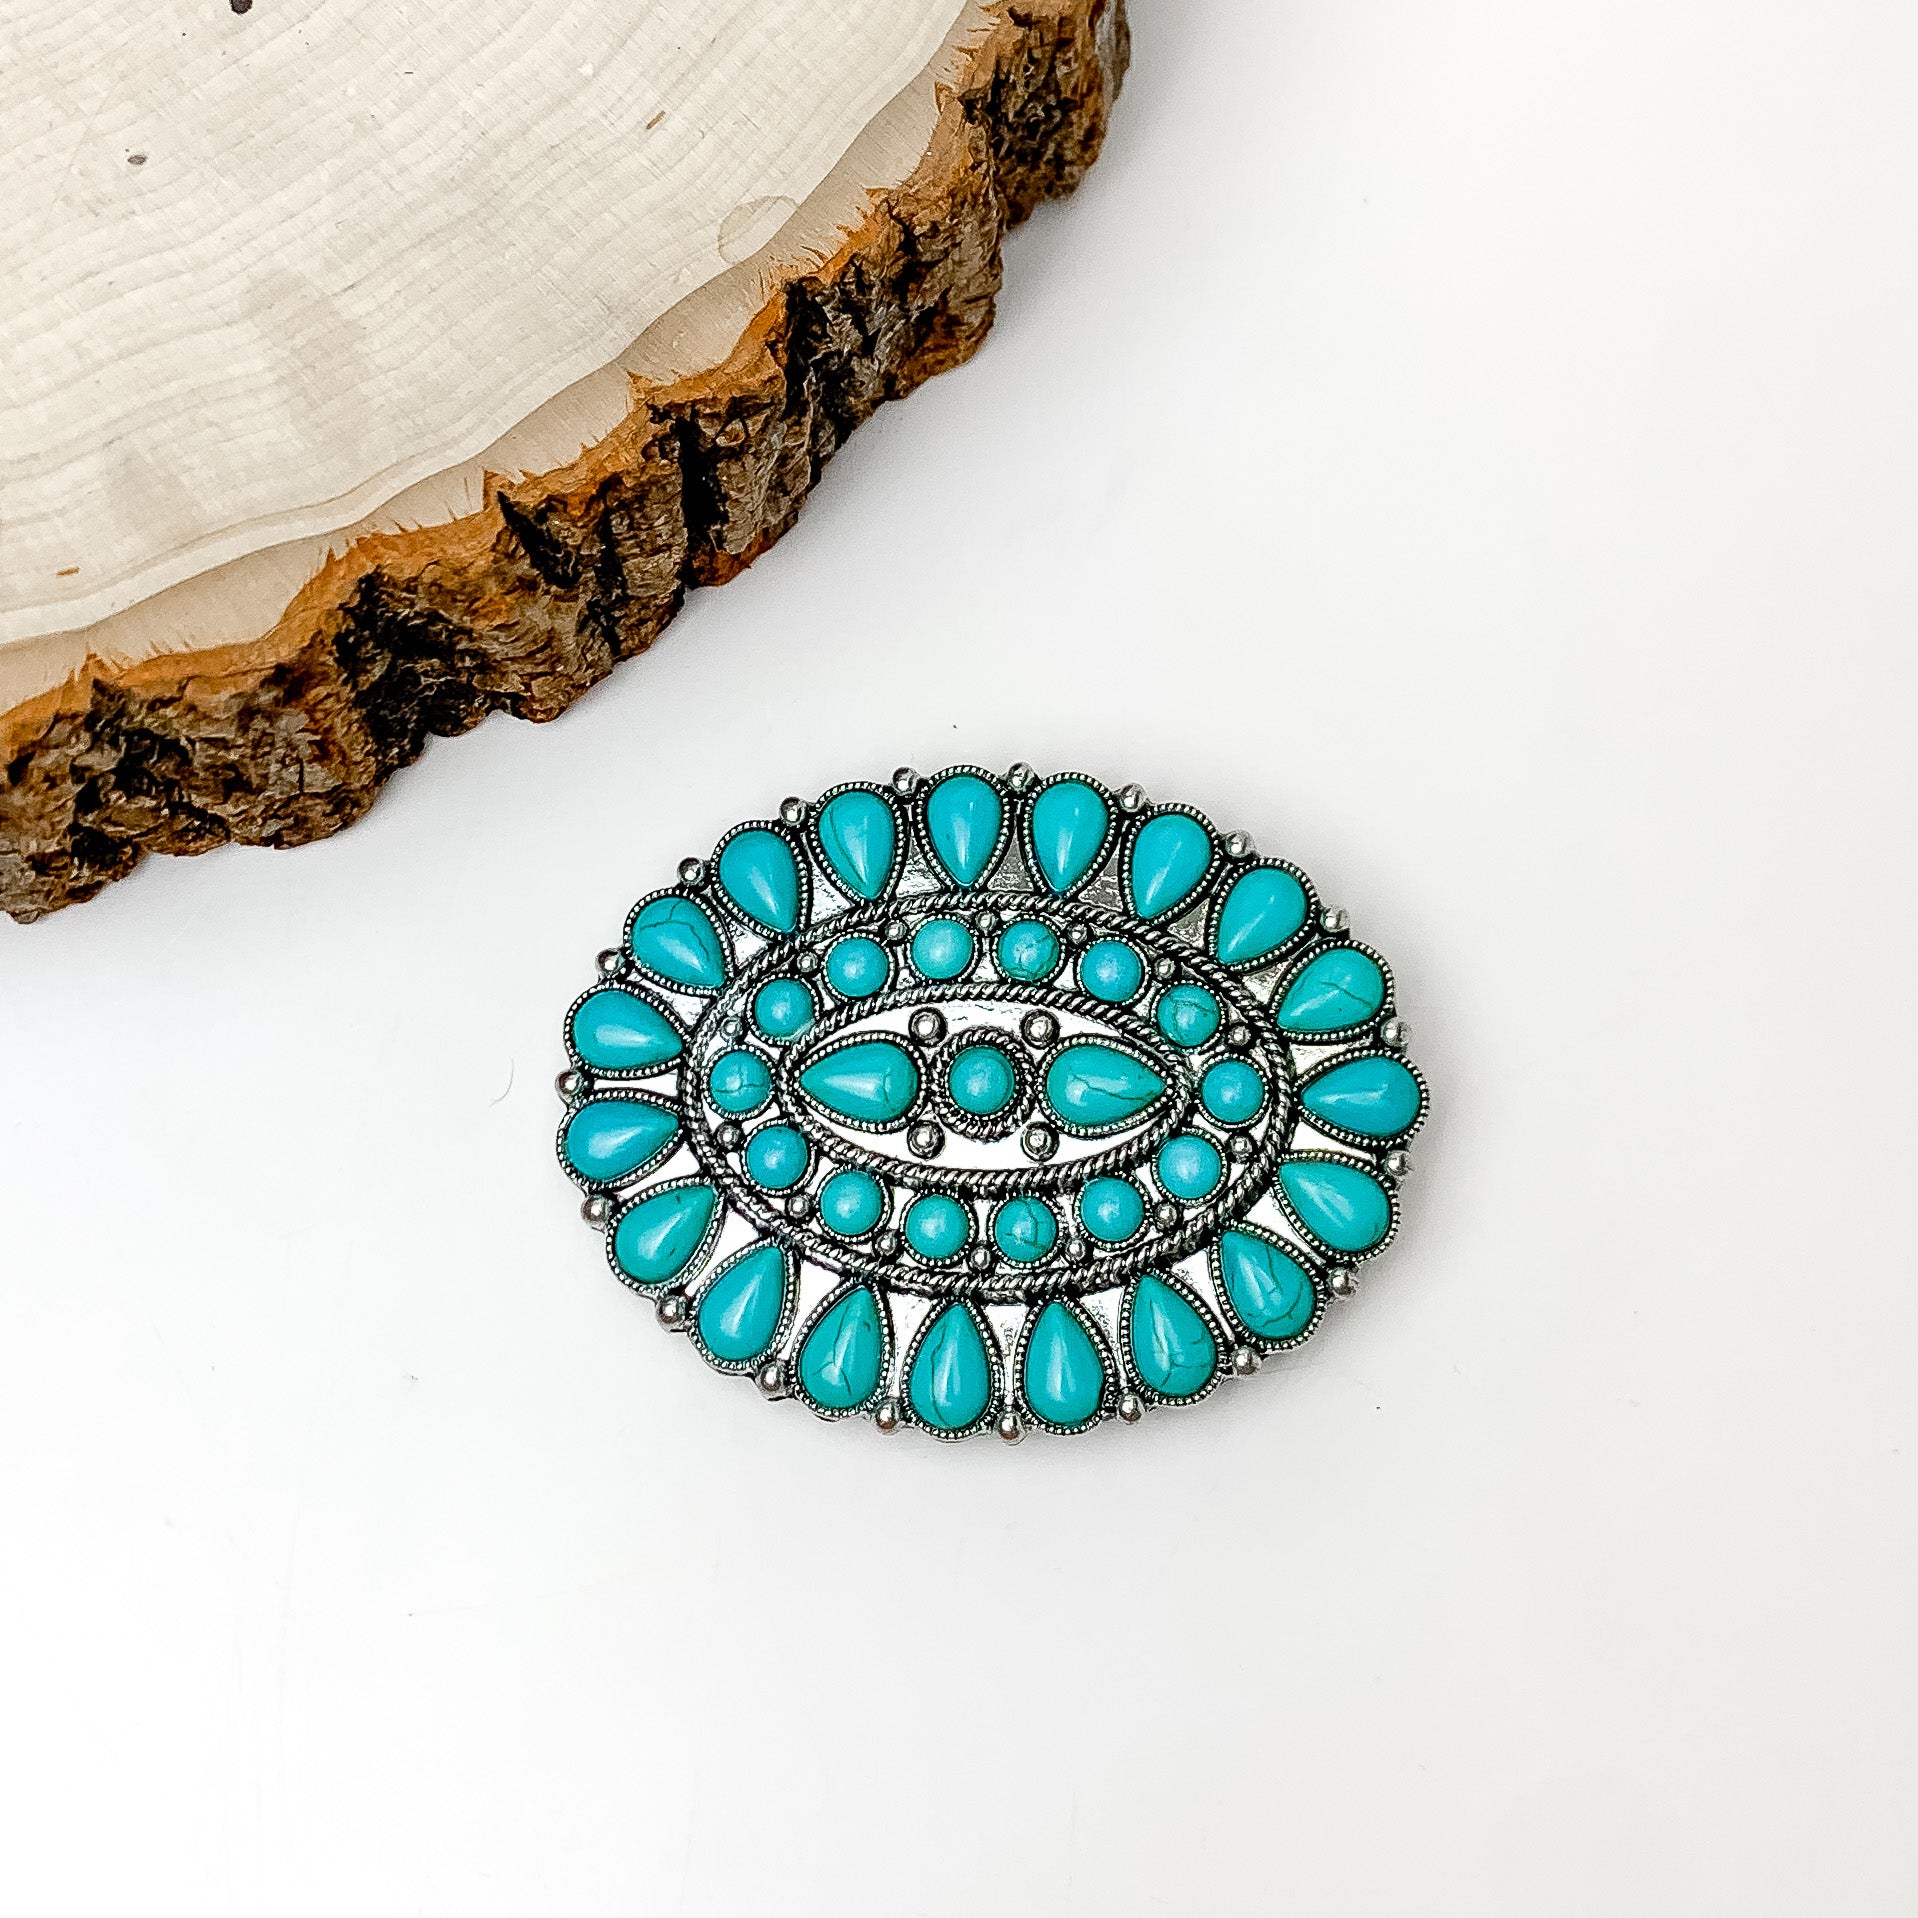 Turquoise Blue Stoned Oval Belt Buckle in Silver Tone. Pictured on a white background with a wood piece in the top left corner.